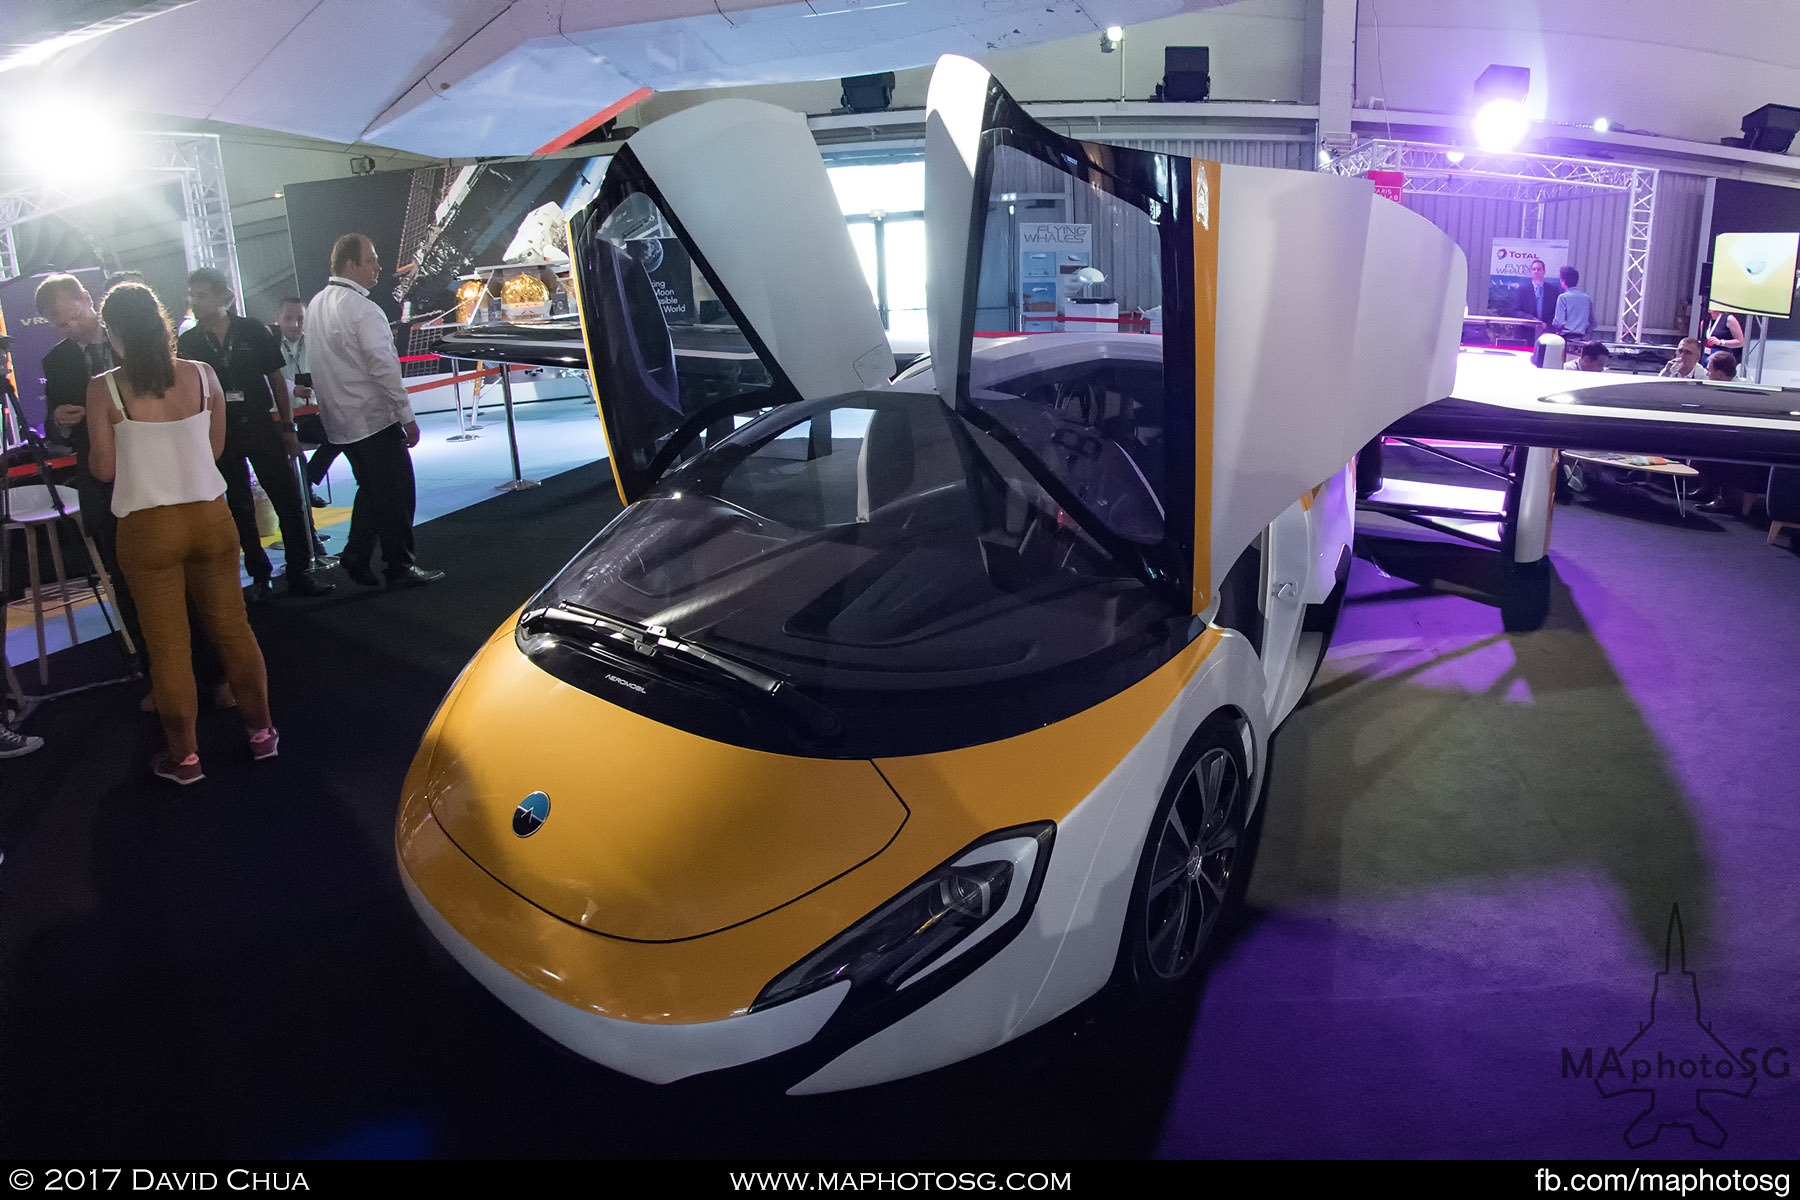 23. Slovakian startup AeroMobil unveiled it’s new flying car as part of the Paris Air Lab, a new exhibition space dedicated to research and innovation. The car is able to go 160 km/h on the road and about 260 km/h in the air. At a cost of 1.2M to 1.5M Euros which is comparable to a small aircraft, one will get an aircraft and a sports car.